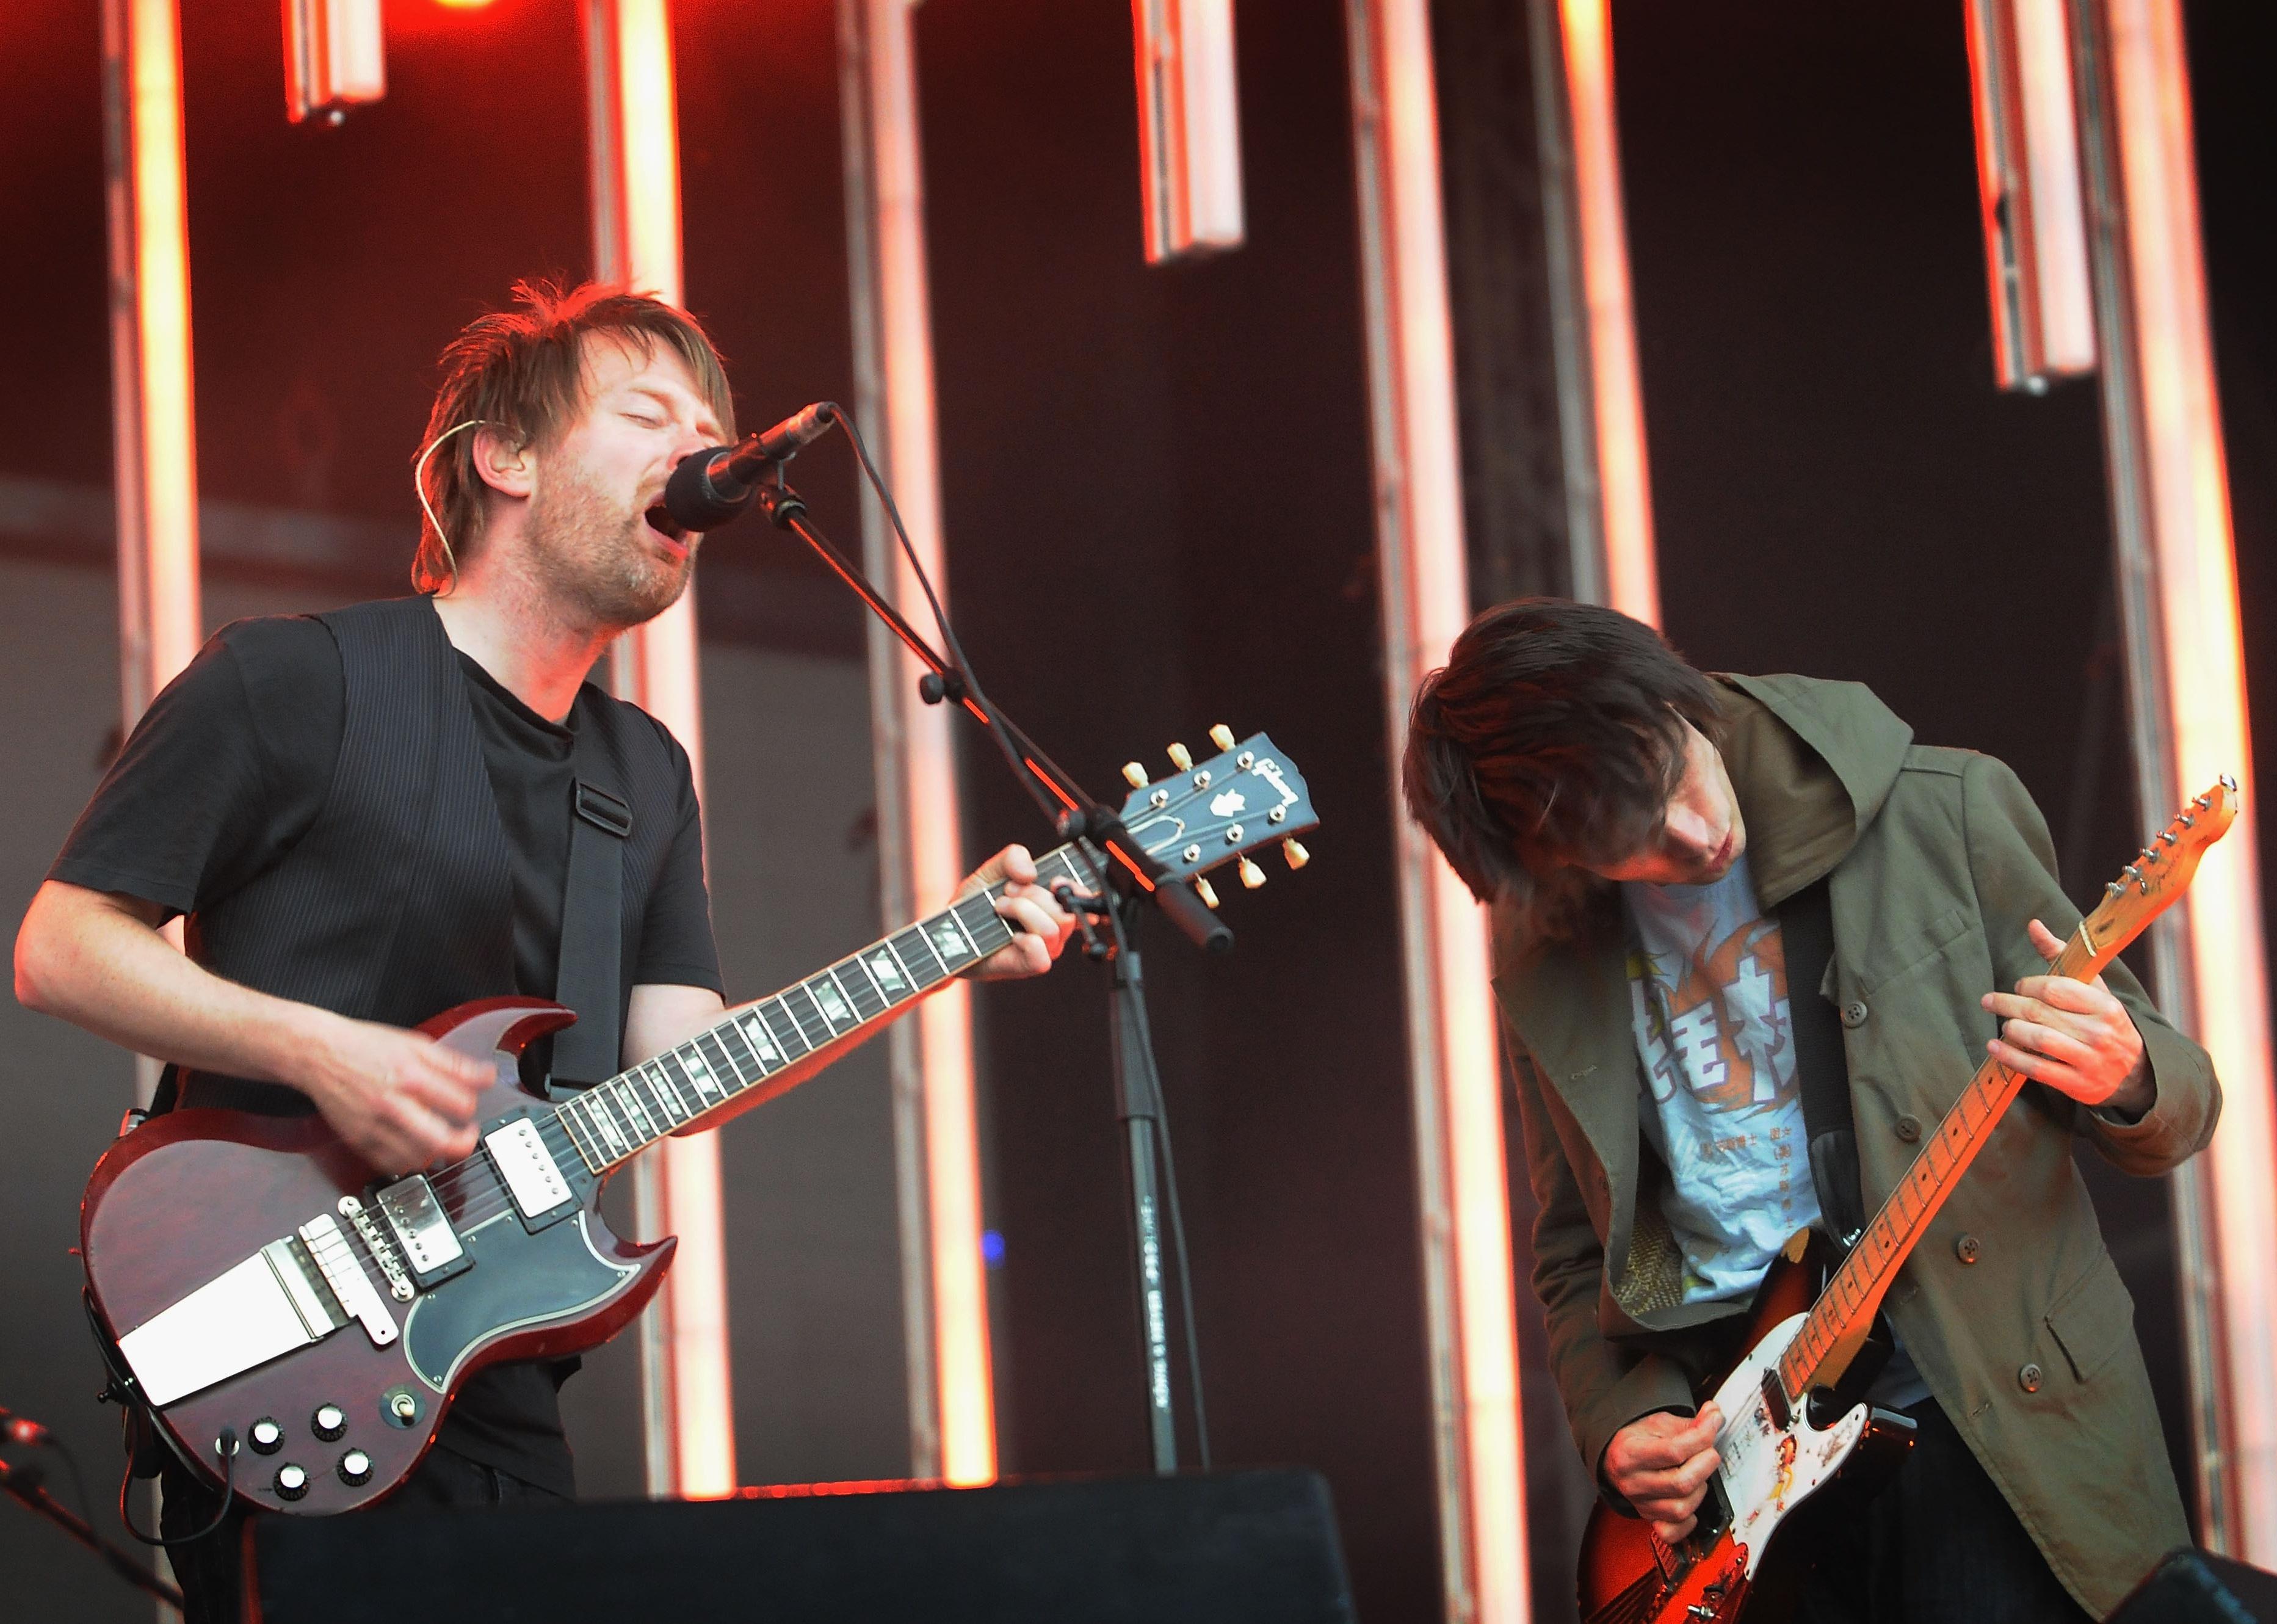 <p>Radiohead's 2008 tour behind the album "In Rainbows" <a href="https://ecolibrium.earth/case-study/radiohead-2008-carbon-neutral-tour/">strived to be the world's first "carbon neutral tour"</a> by reducing emissions. It was also a masterclass in performance, with fans citing the show in Japan's Saitama Super Arena as being particularly strong. The setlist for that show <a href="https://www.setlist.fm/setlist/radiohead/2008/saitama-super-arena-saitama-japan-7bd6f6d0.html">featured two encores</a> and a whopping 25 songs in total.</p>